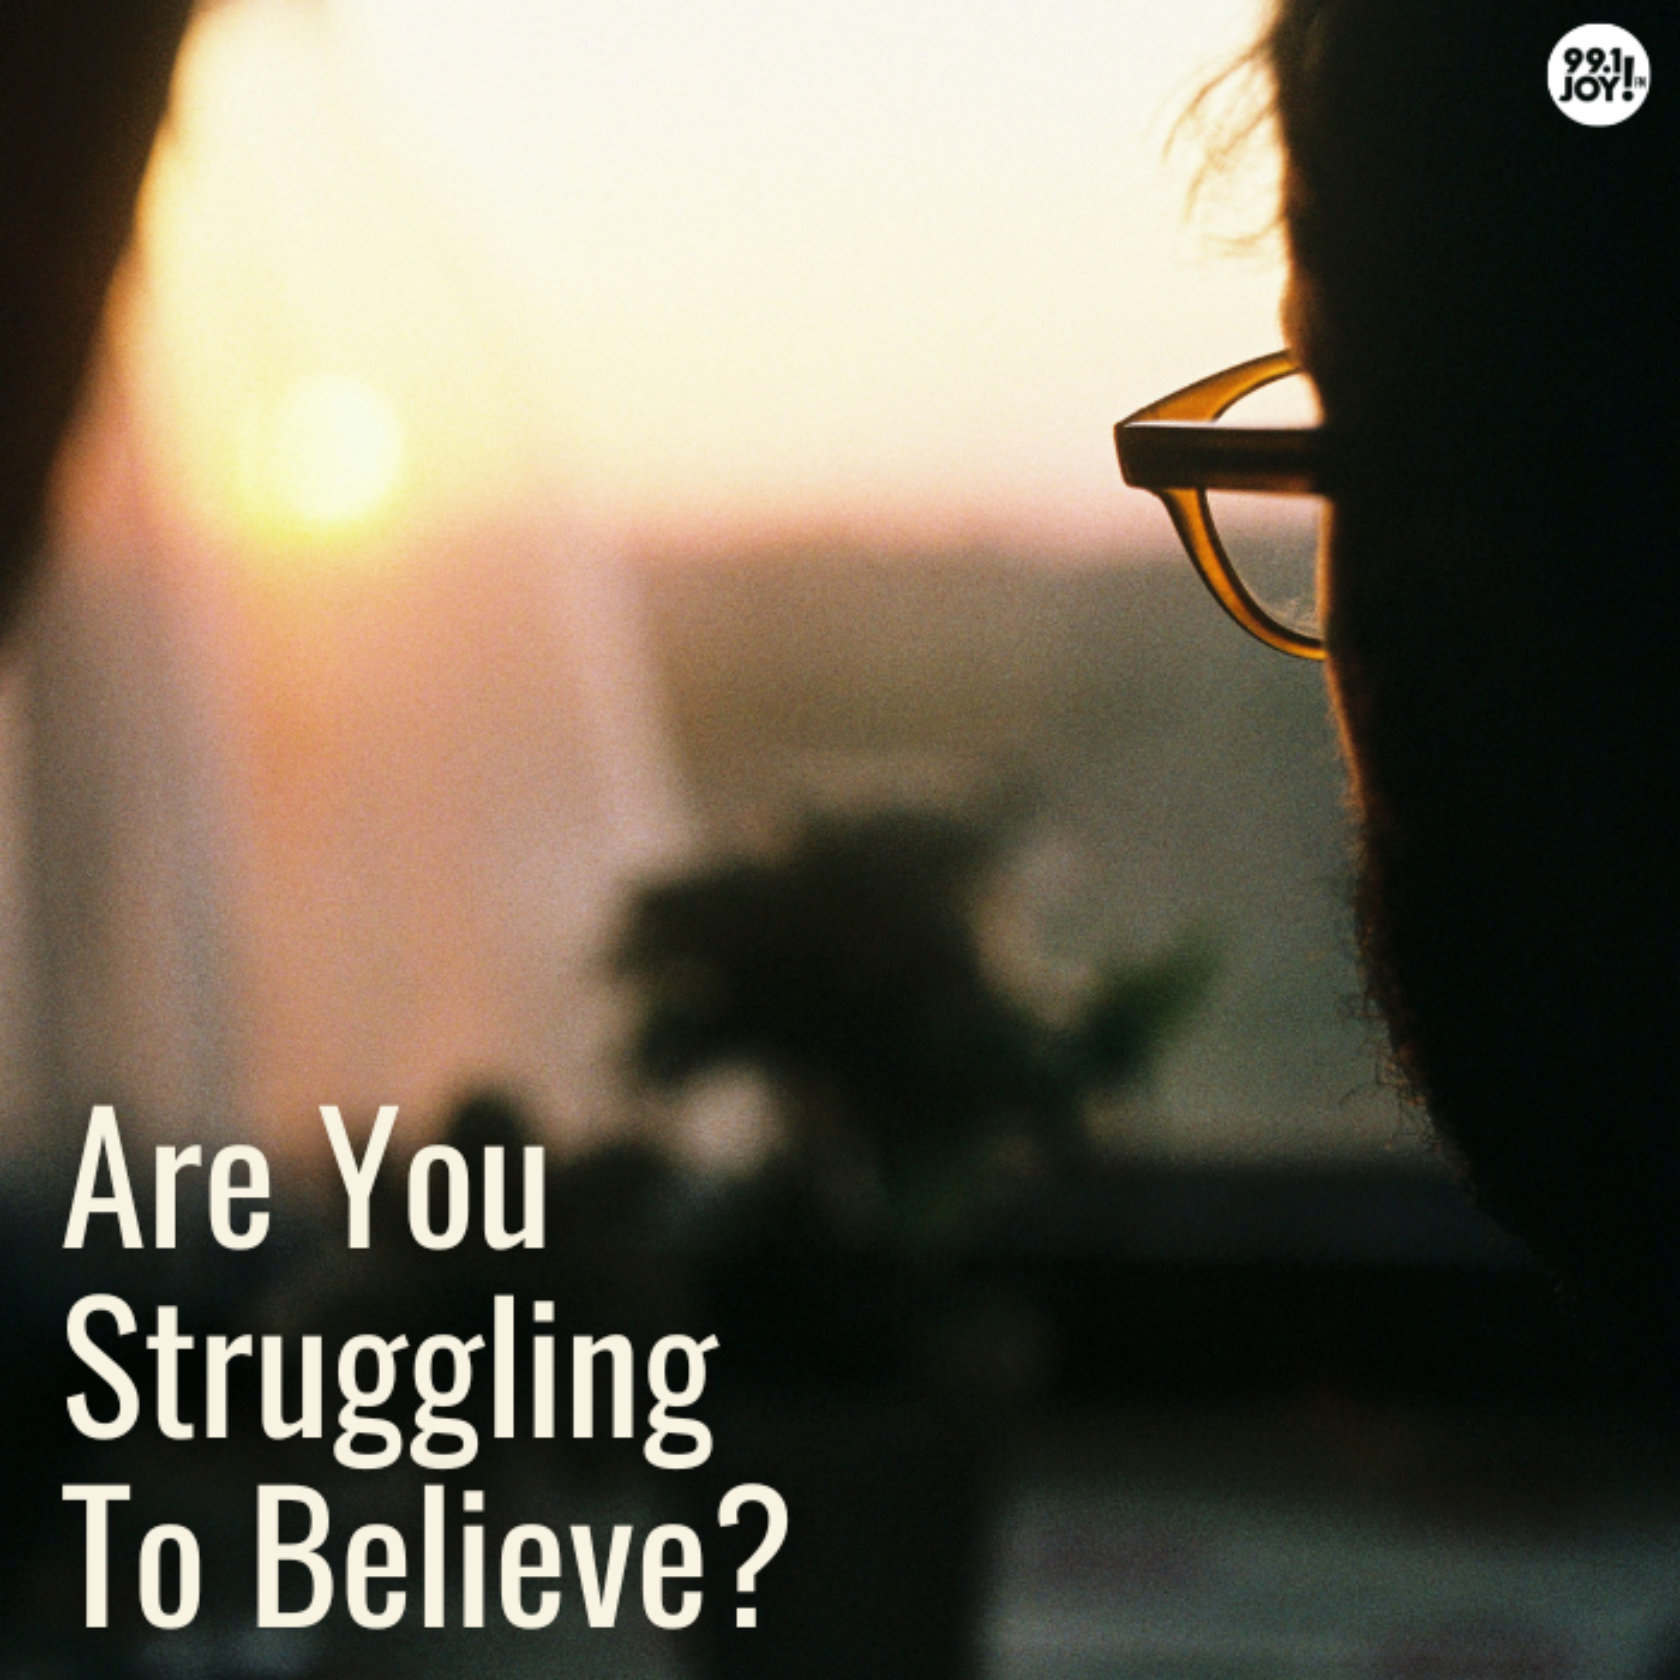 Are You Struggling To Believe?